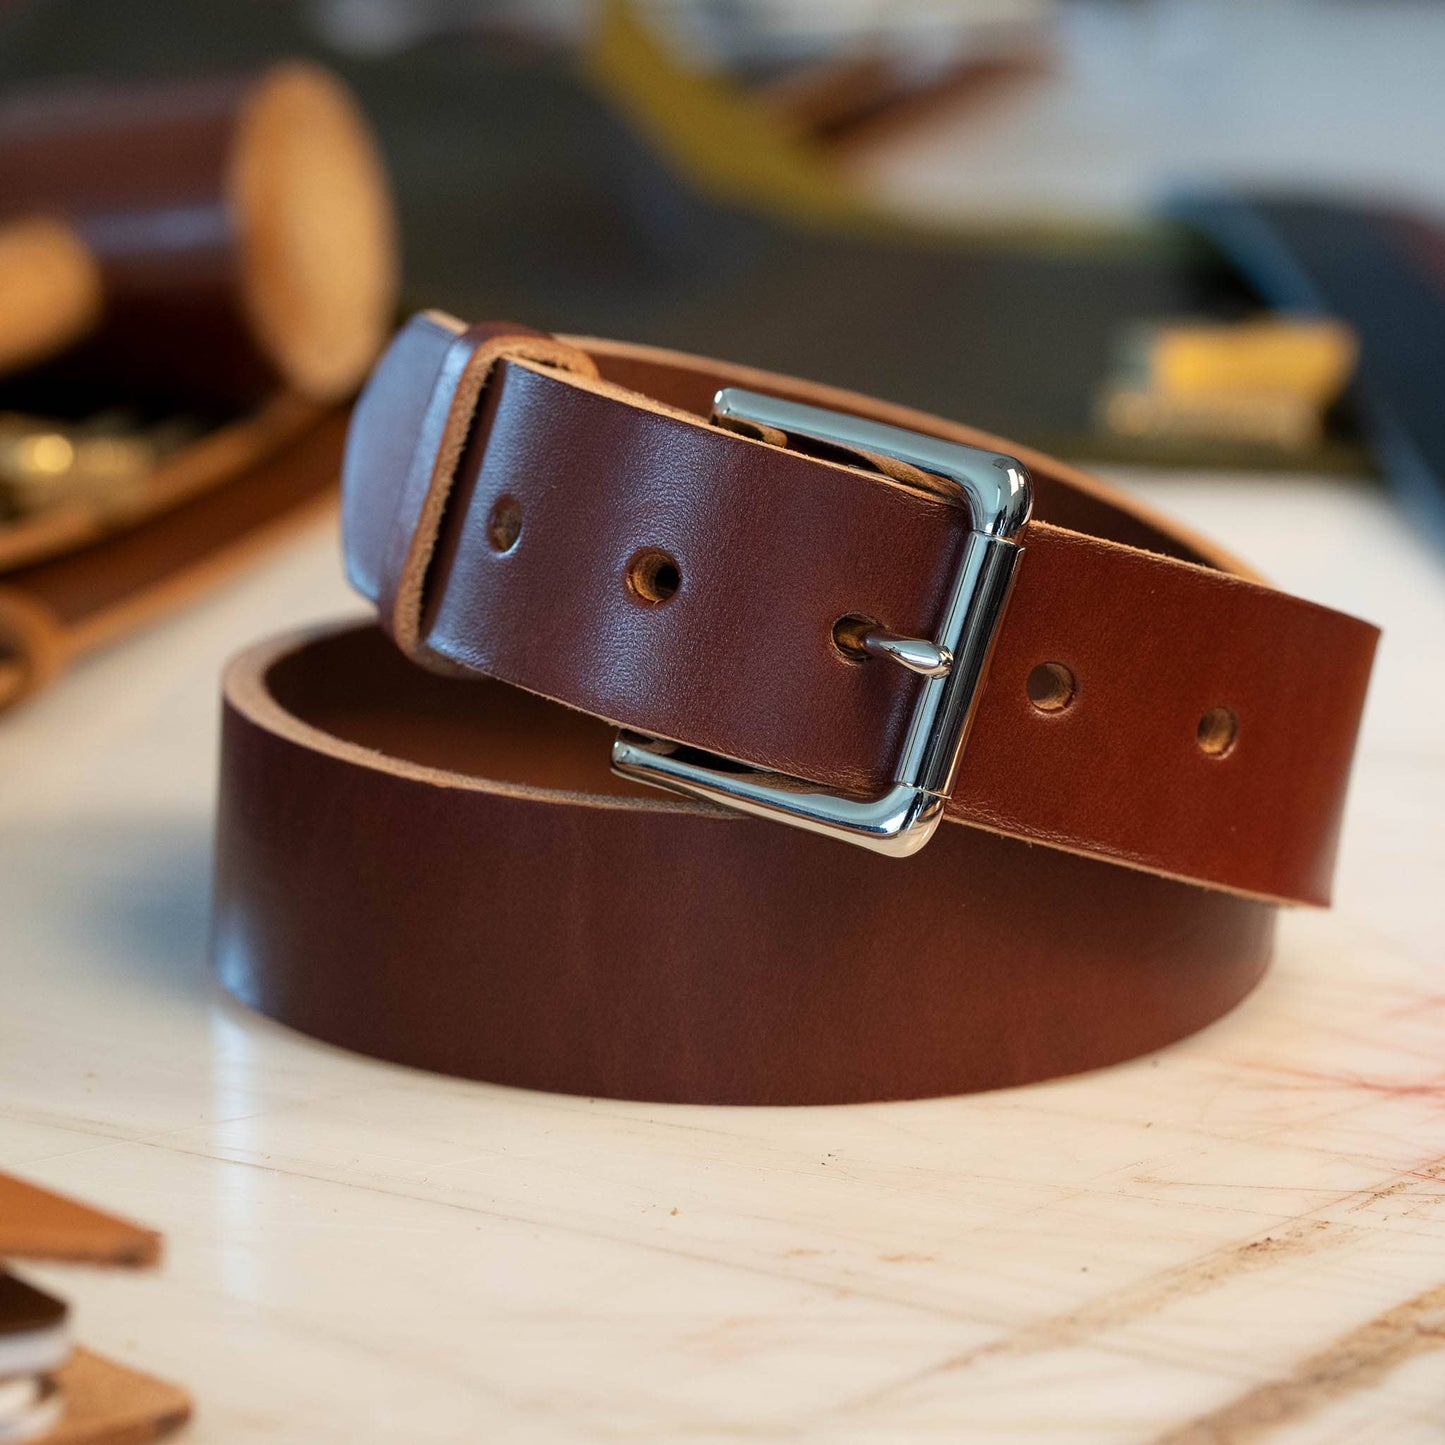 British Brown leather belt with a chrome casual belt buckle.